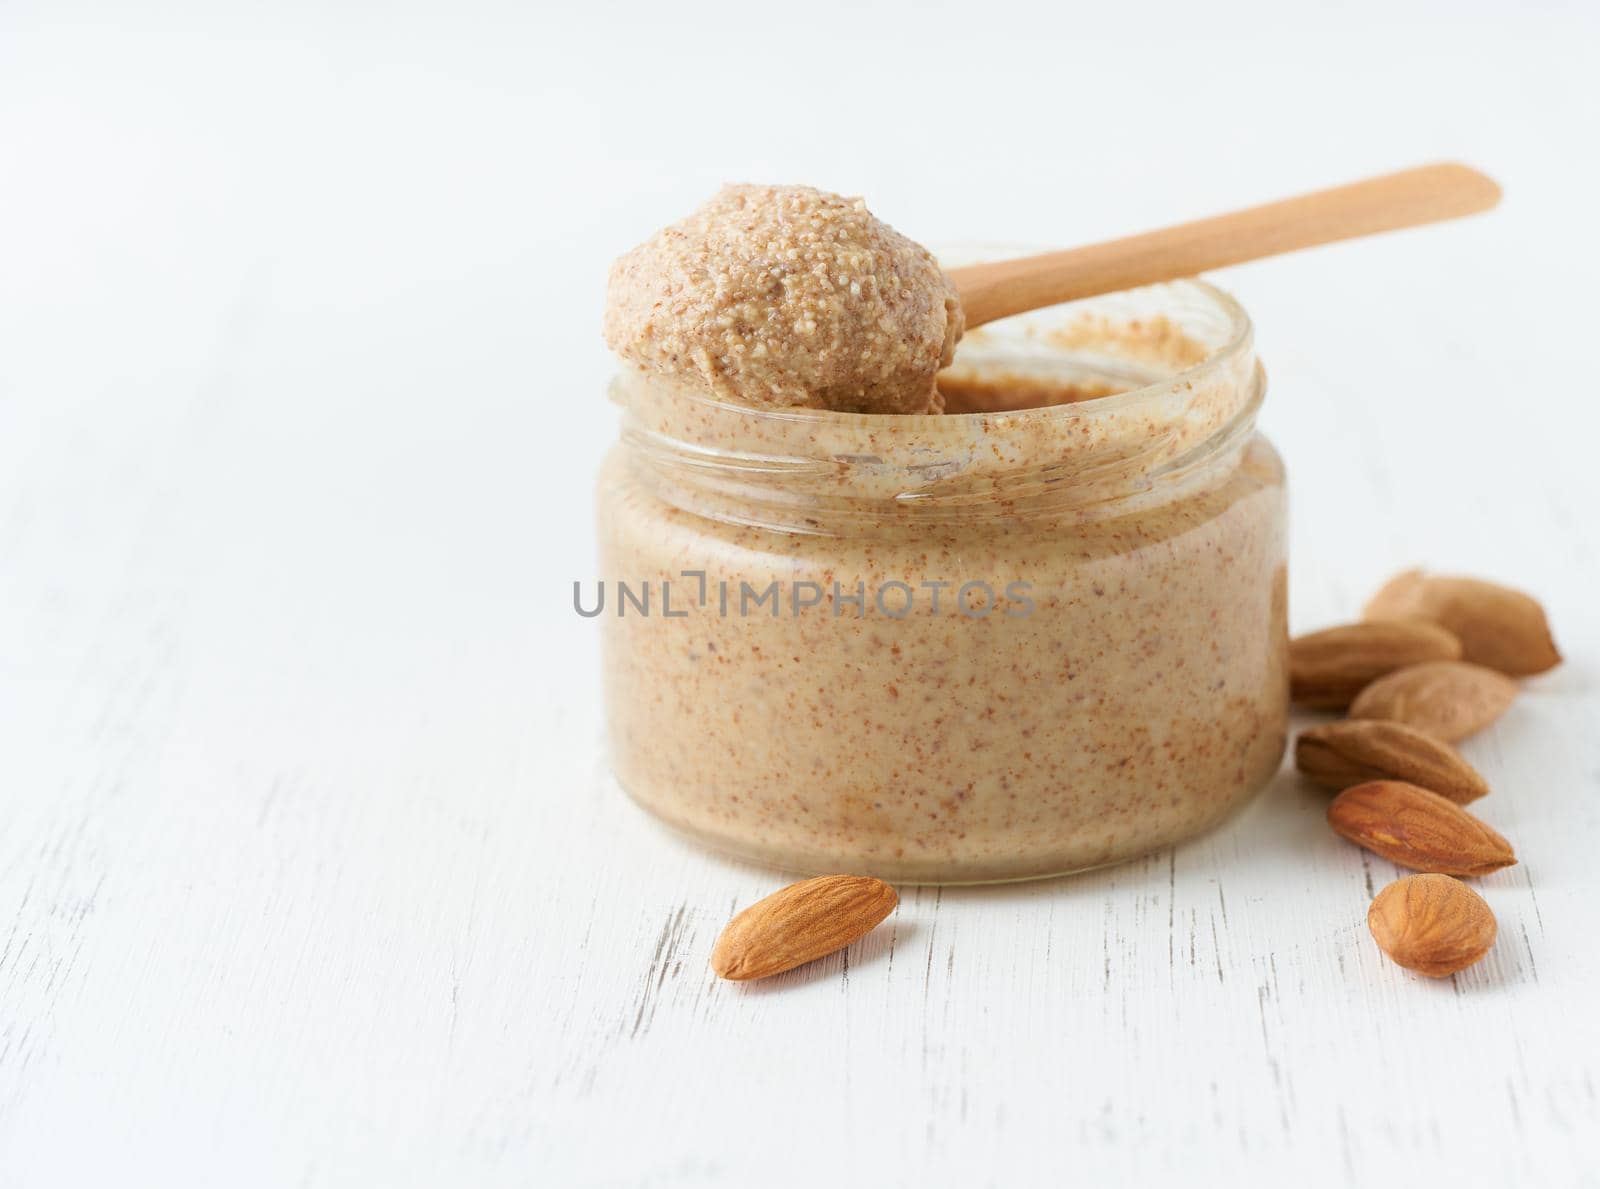 Almond butter, raw food paste made from grinding almonds, glass jar, side view, close up by NataBene